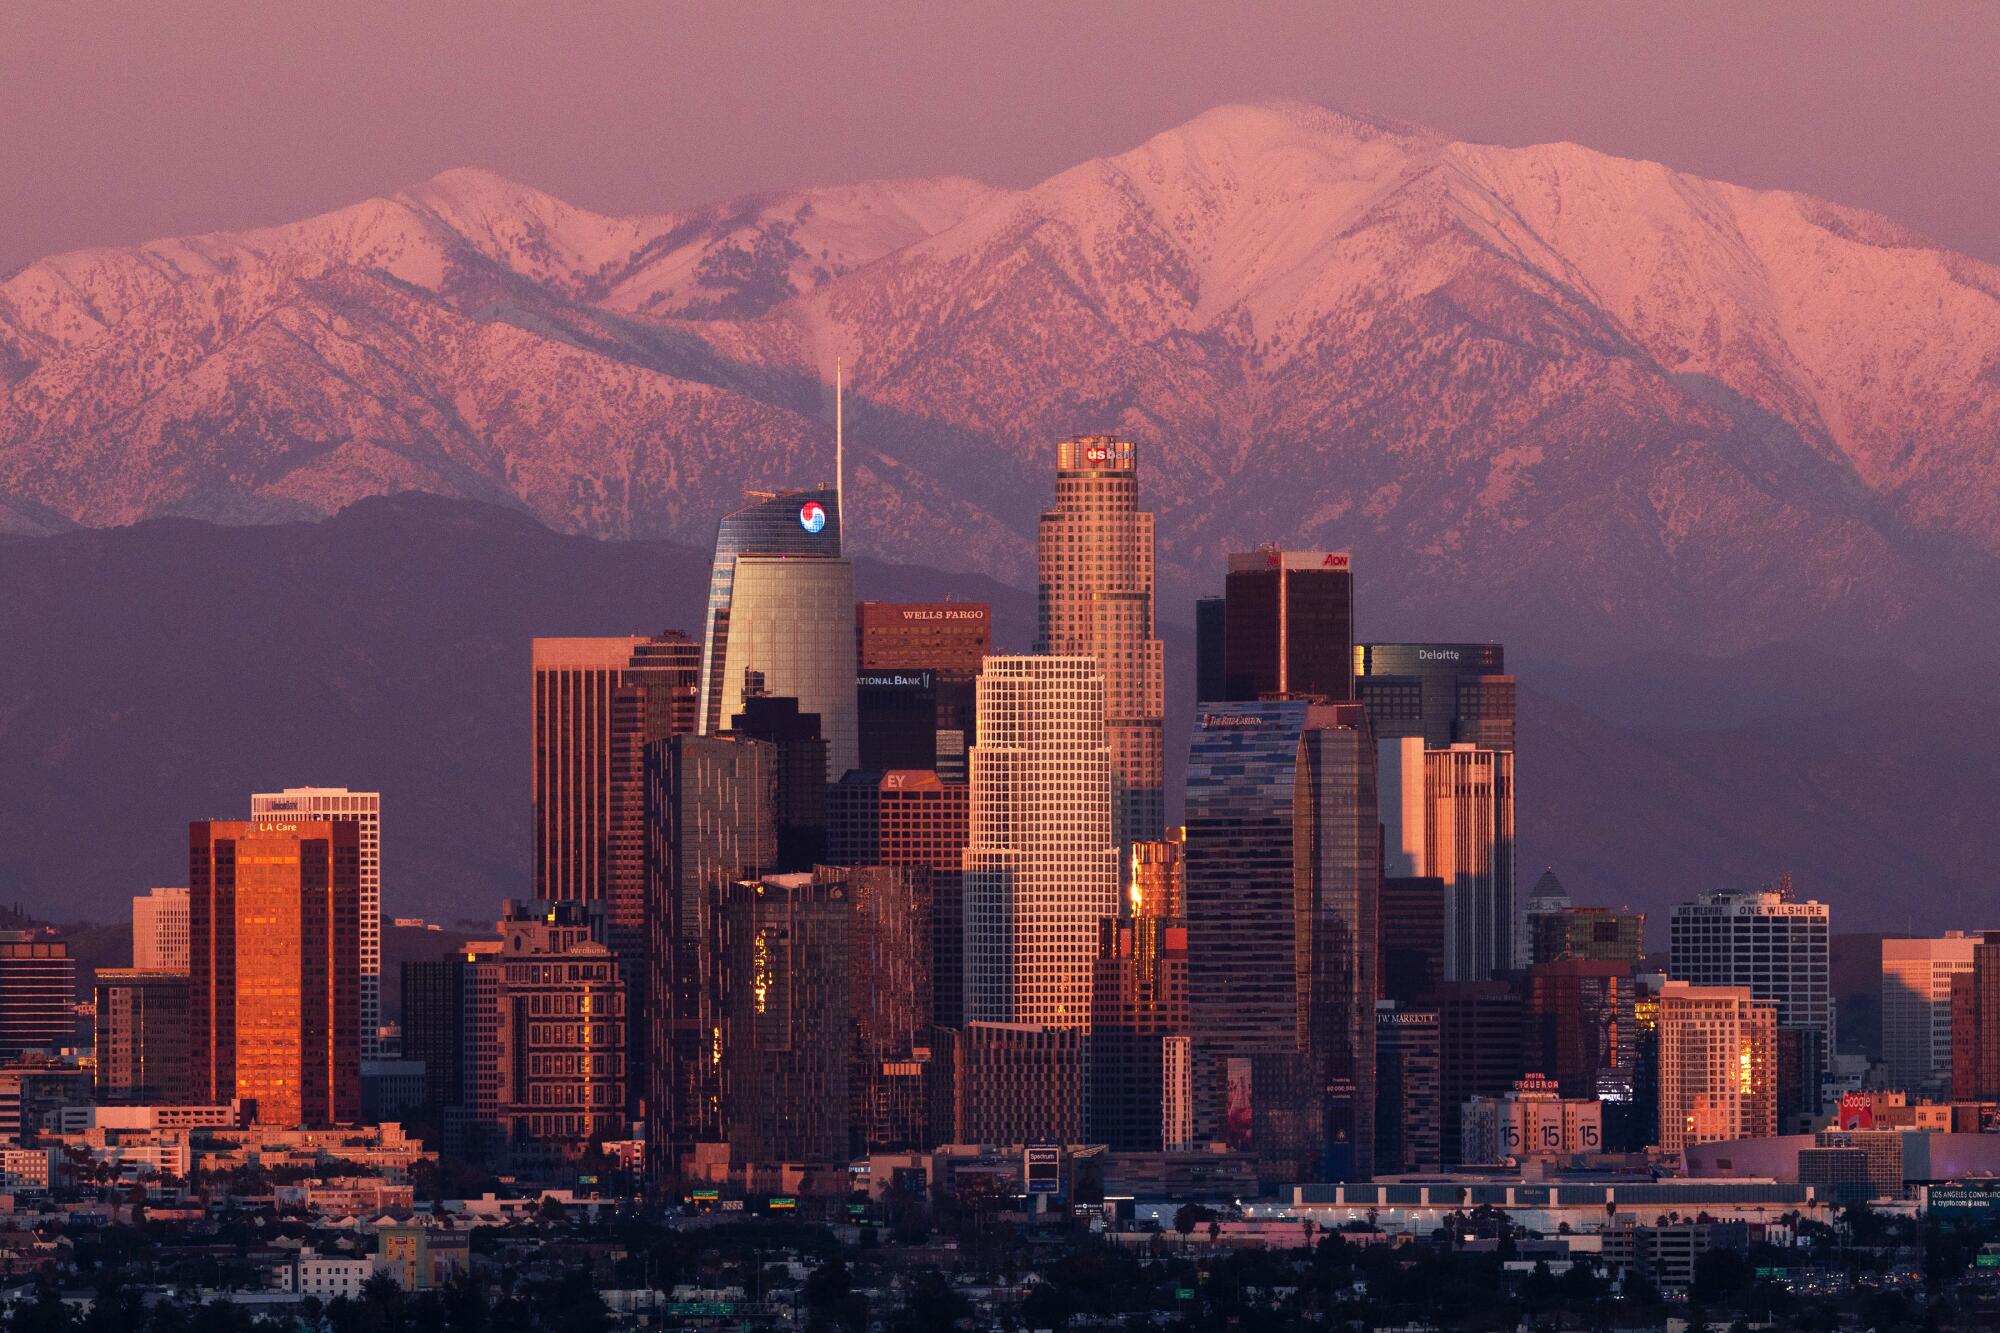 Snow-covered mountains glow pink in the sunset.